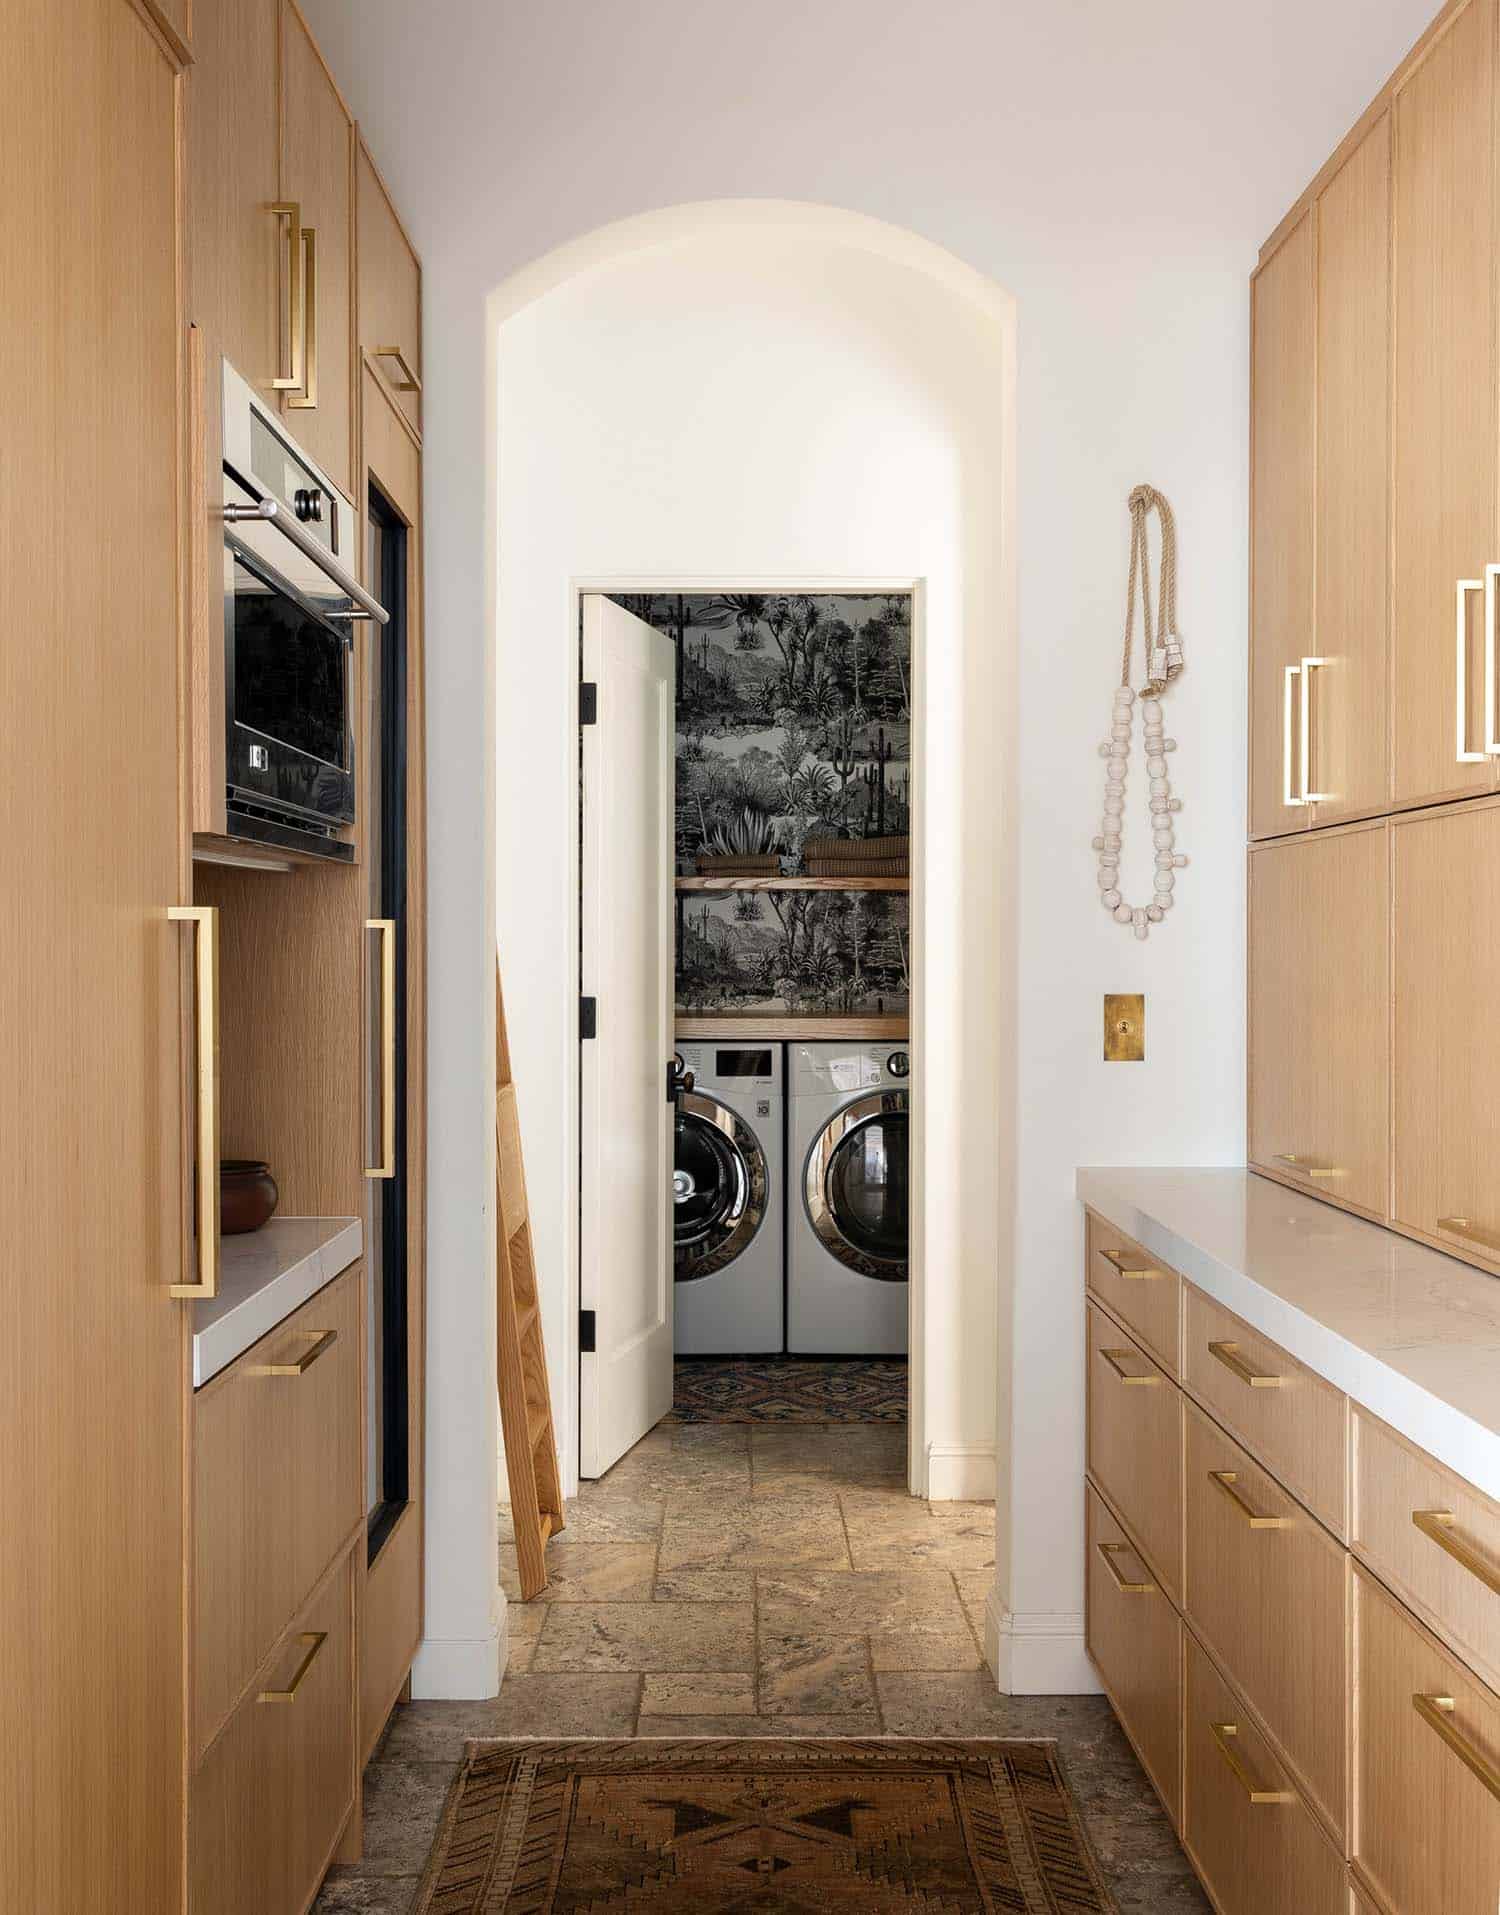 spanish colonial inspired kitchen pantry leading to the laundry room